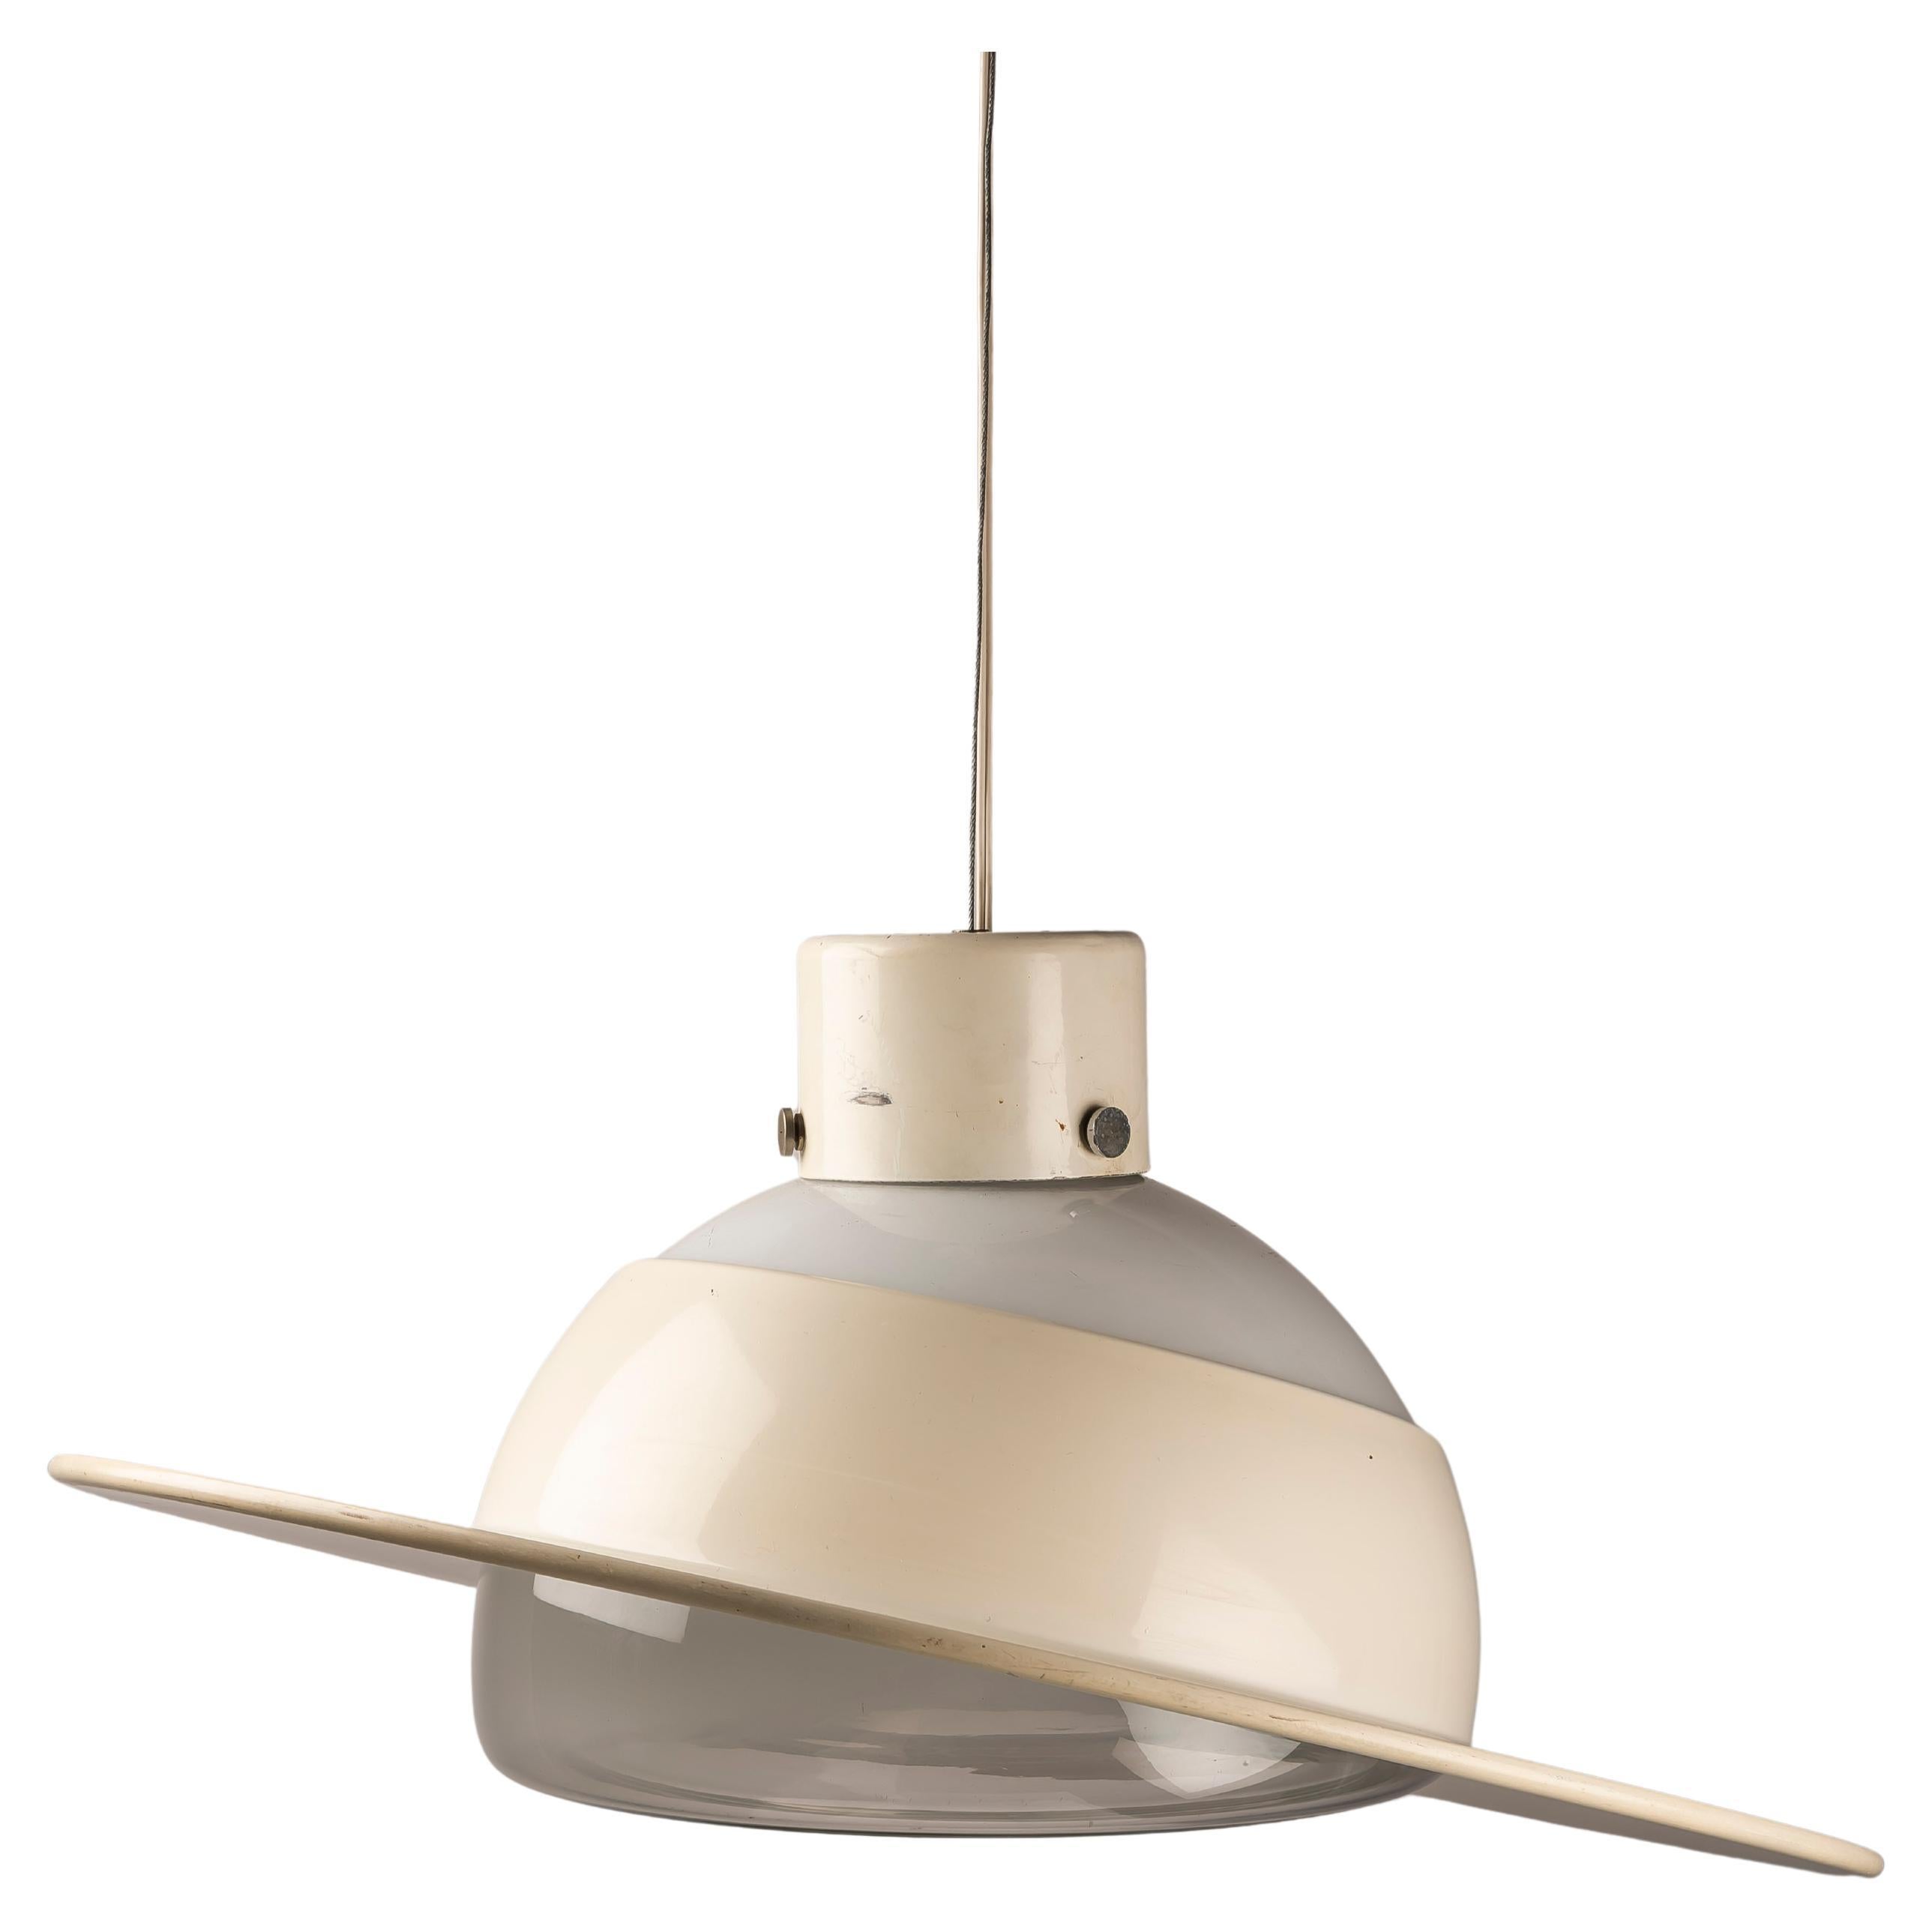 A Saturn metal and Murano glass Space age Italian pendant lamp For Sale